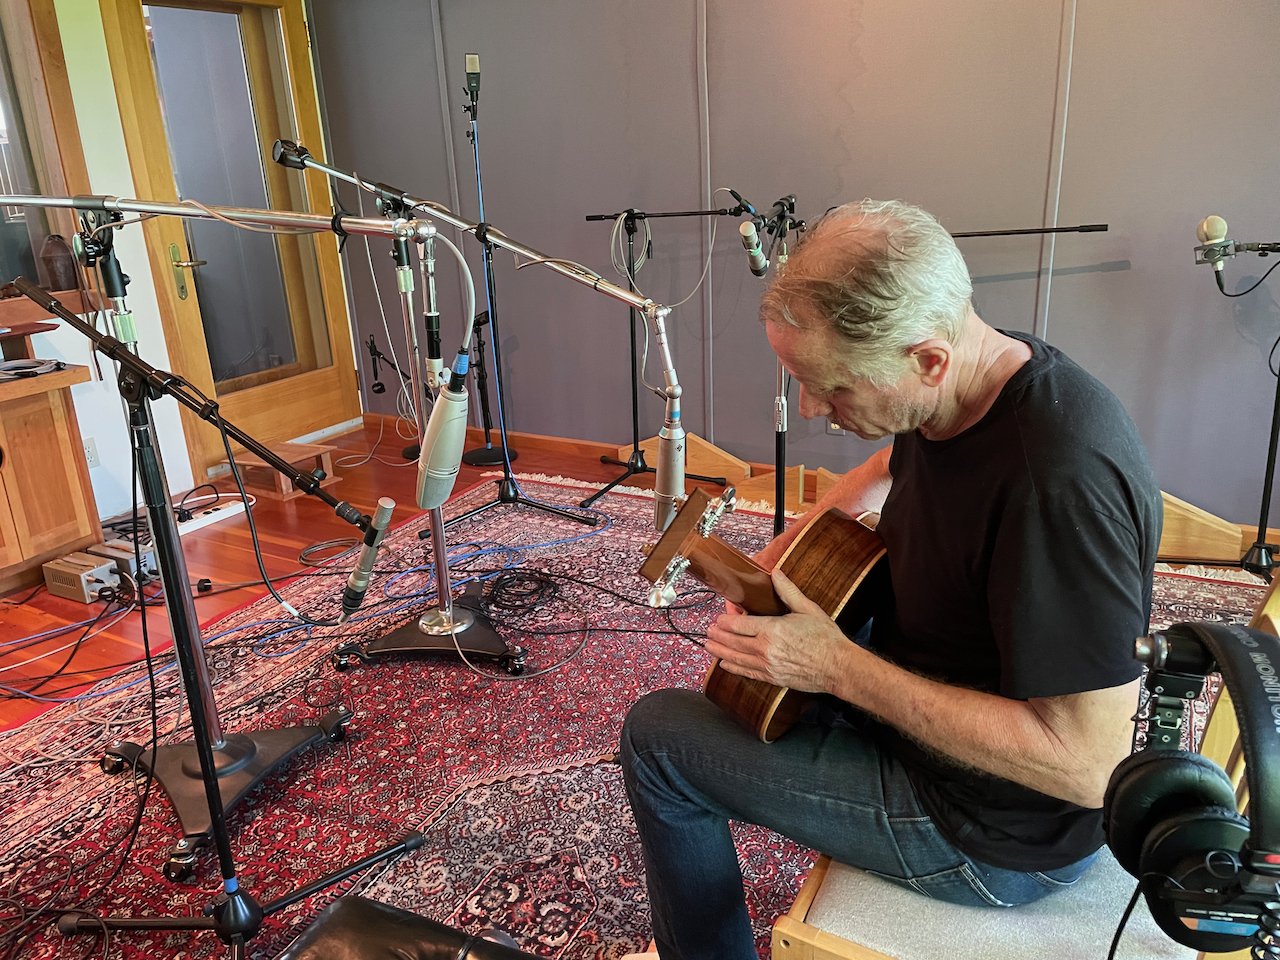  A typical setup for guitar recording includes six mics. Close up, left to right: Neumann KM256, Shure KSM44 (subbing for a Neumann U67 out for repair), Neumann U67, and a second KM256. The set-back room mic (one of a pair) is an AKG C414.  